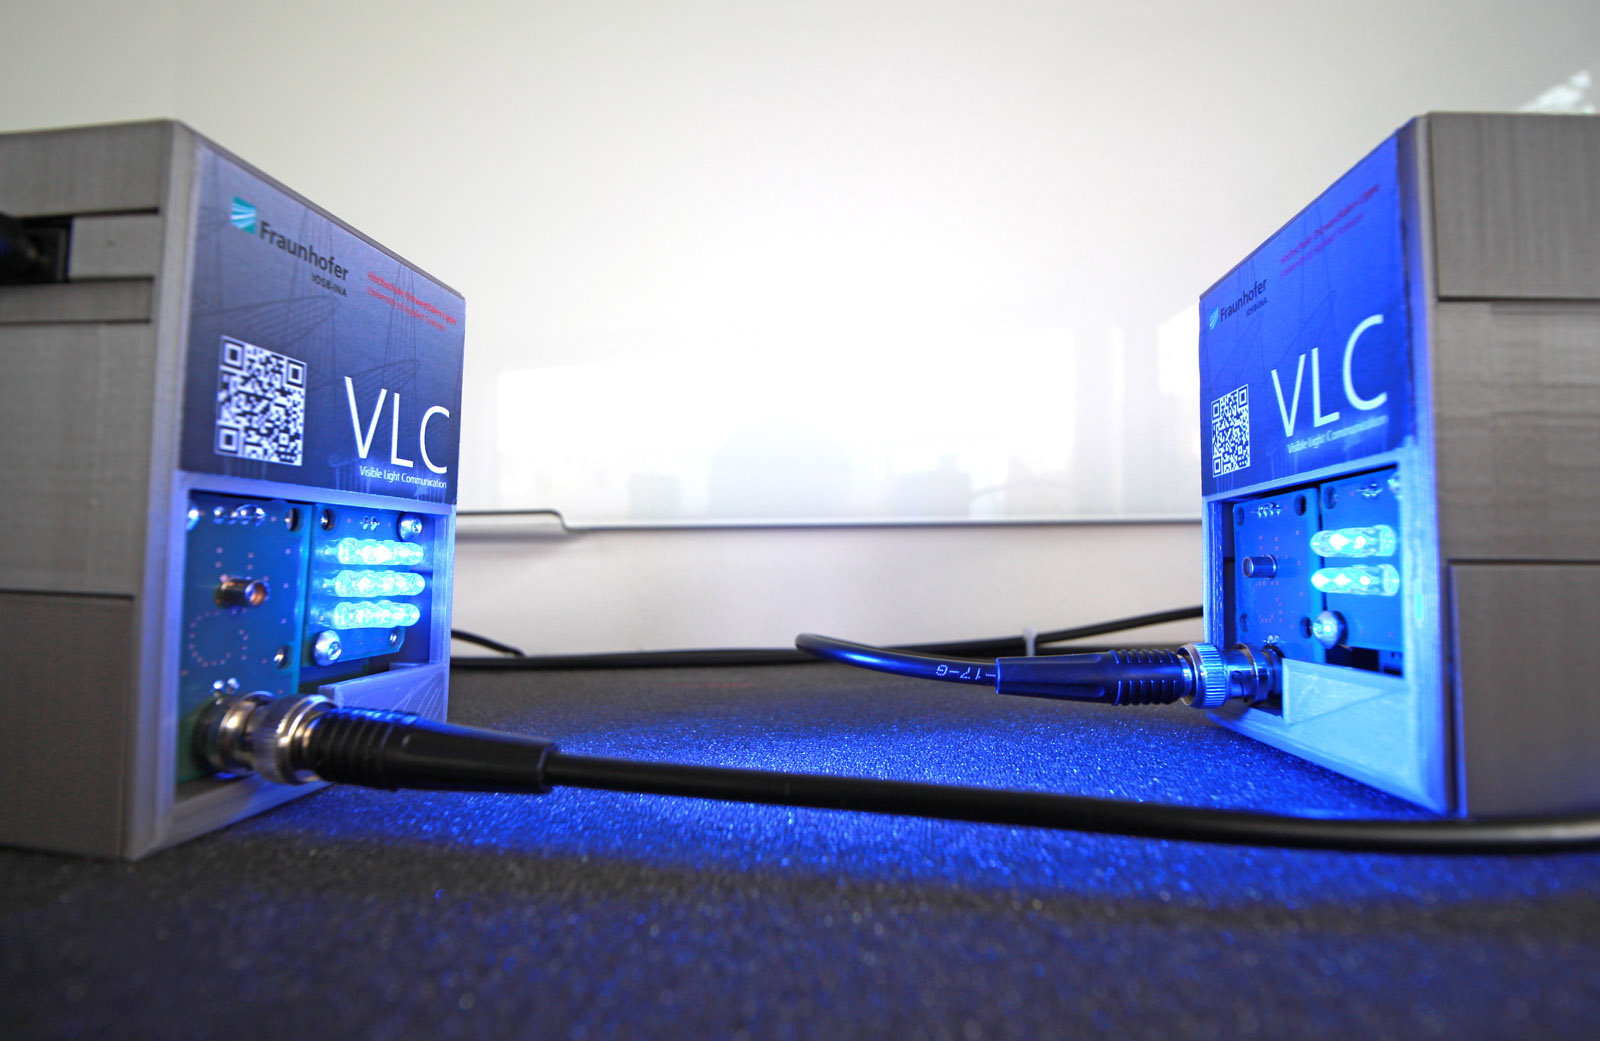 Currently, the VLC systems are available as a demonstrator. The final systems will be ready for use in connected manufacturing as early as mid-2021.